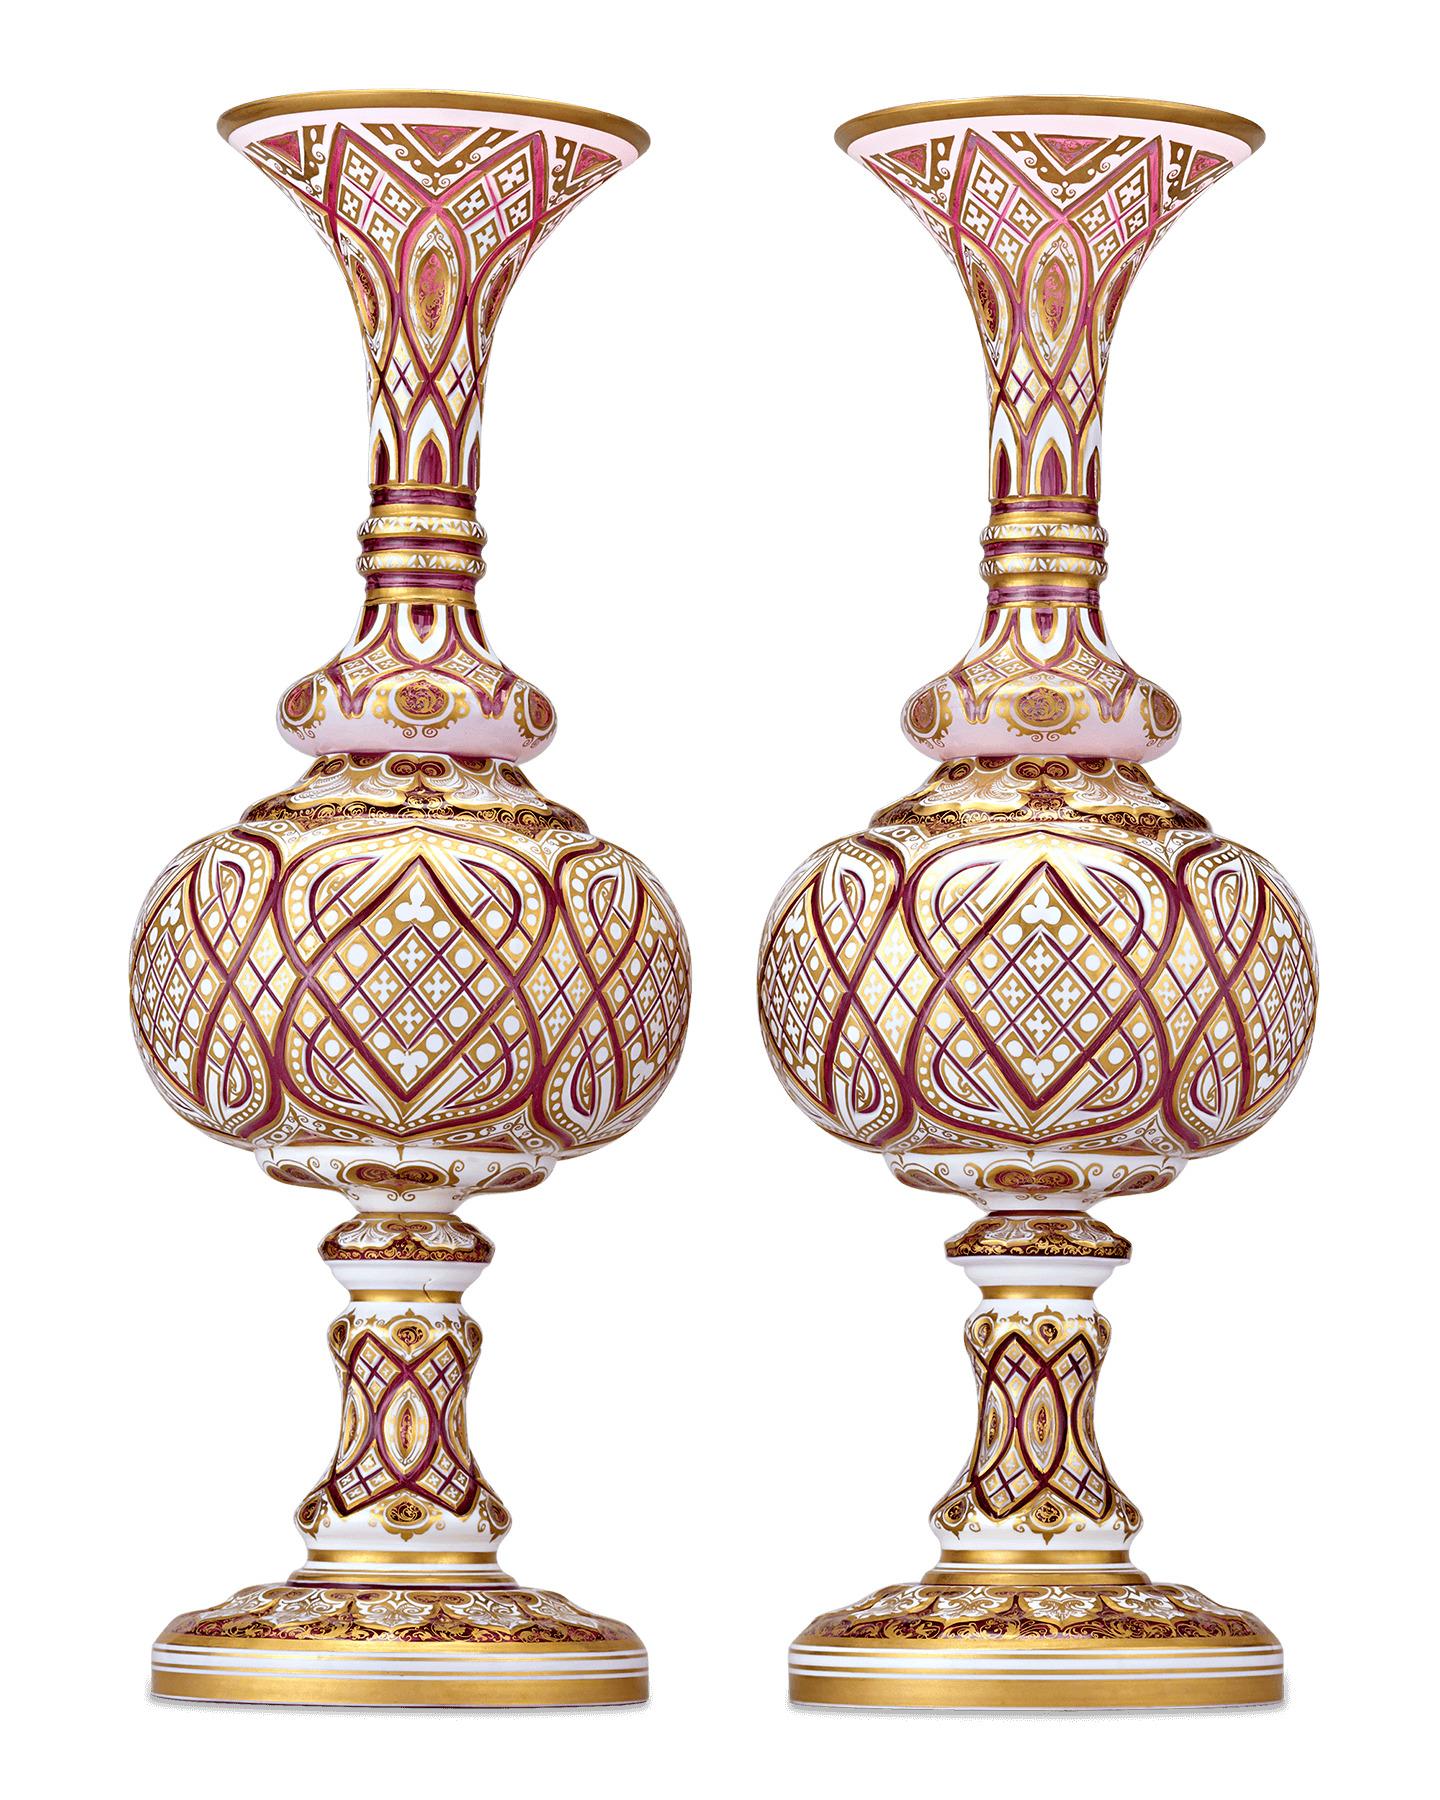 This resplendent pair of art glass vases exhibit the incredible detail and craftsmanship exemplary of Bohemian art glass. Rare crimson glass — the most coveted of Bohemian glass hues — mingles elegantly with white and gold in an intricately